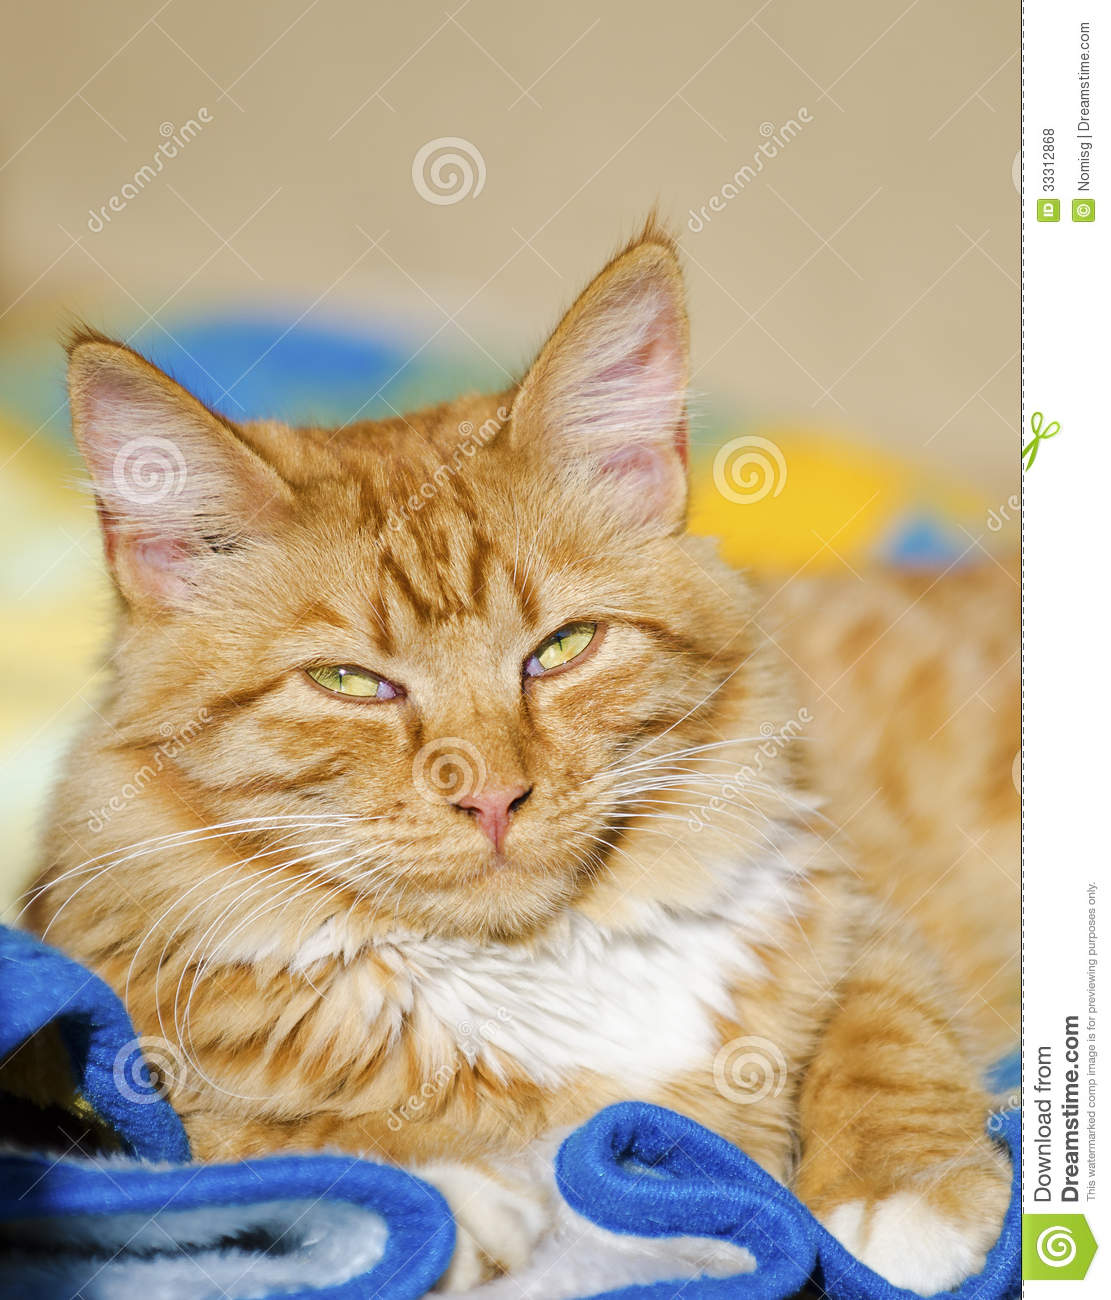 Ginger Cat Relaxing Royalty Free Stock Photos   Image  33312868